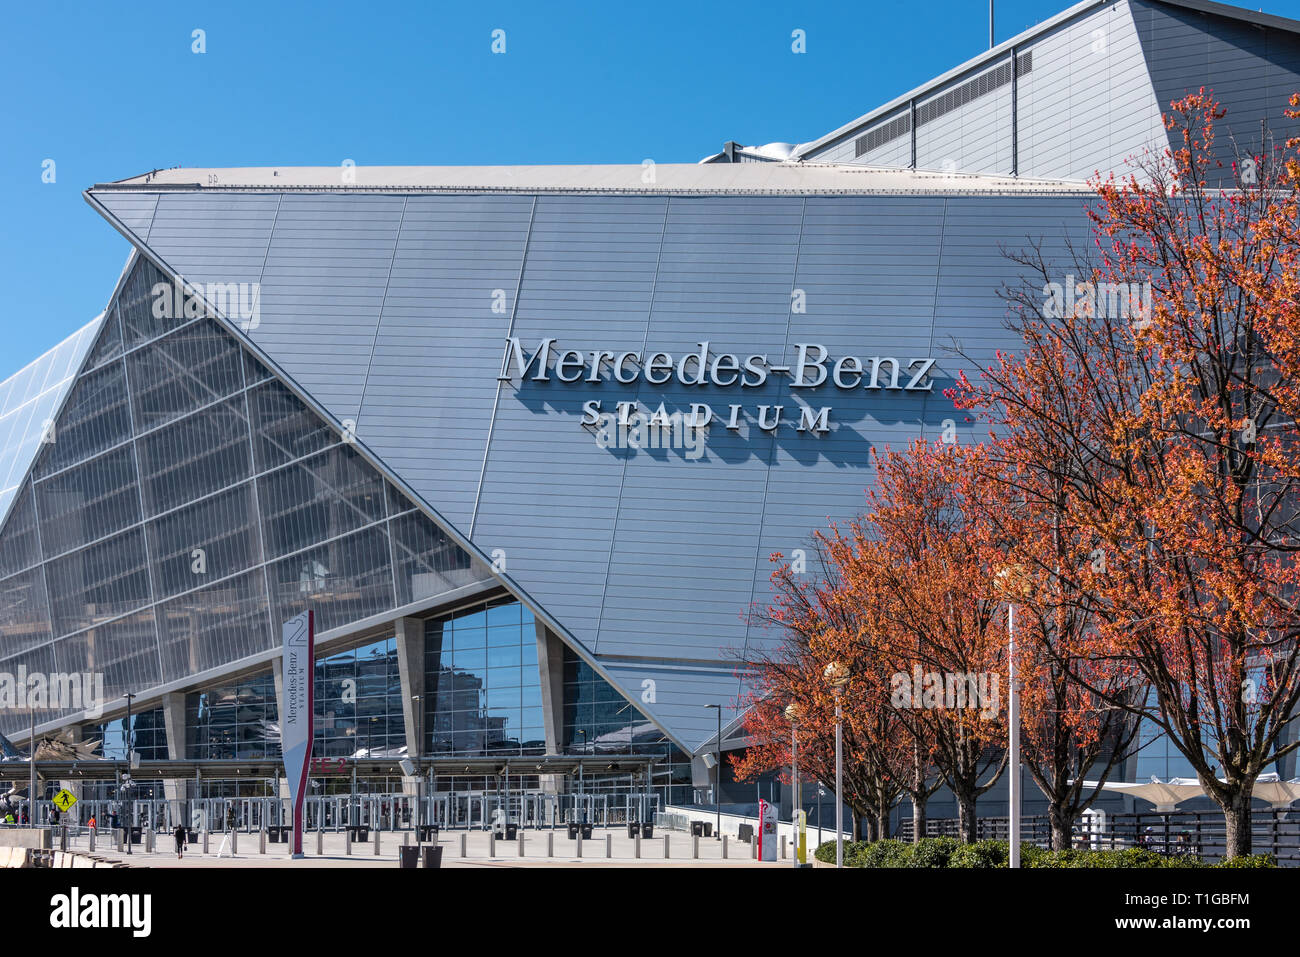 Mercedes-Benz Stadium in Atlanta, Georgia, home of the NFL's Atlanta Falcons and the MLS's Atlanta United FC, as well as host to Super Bowl LIII. Stock Photo